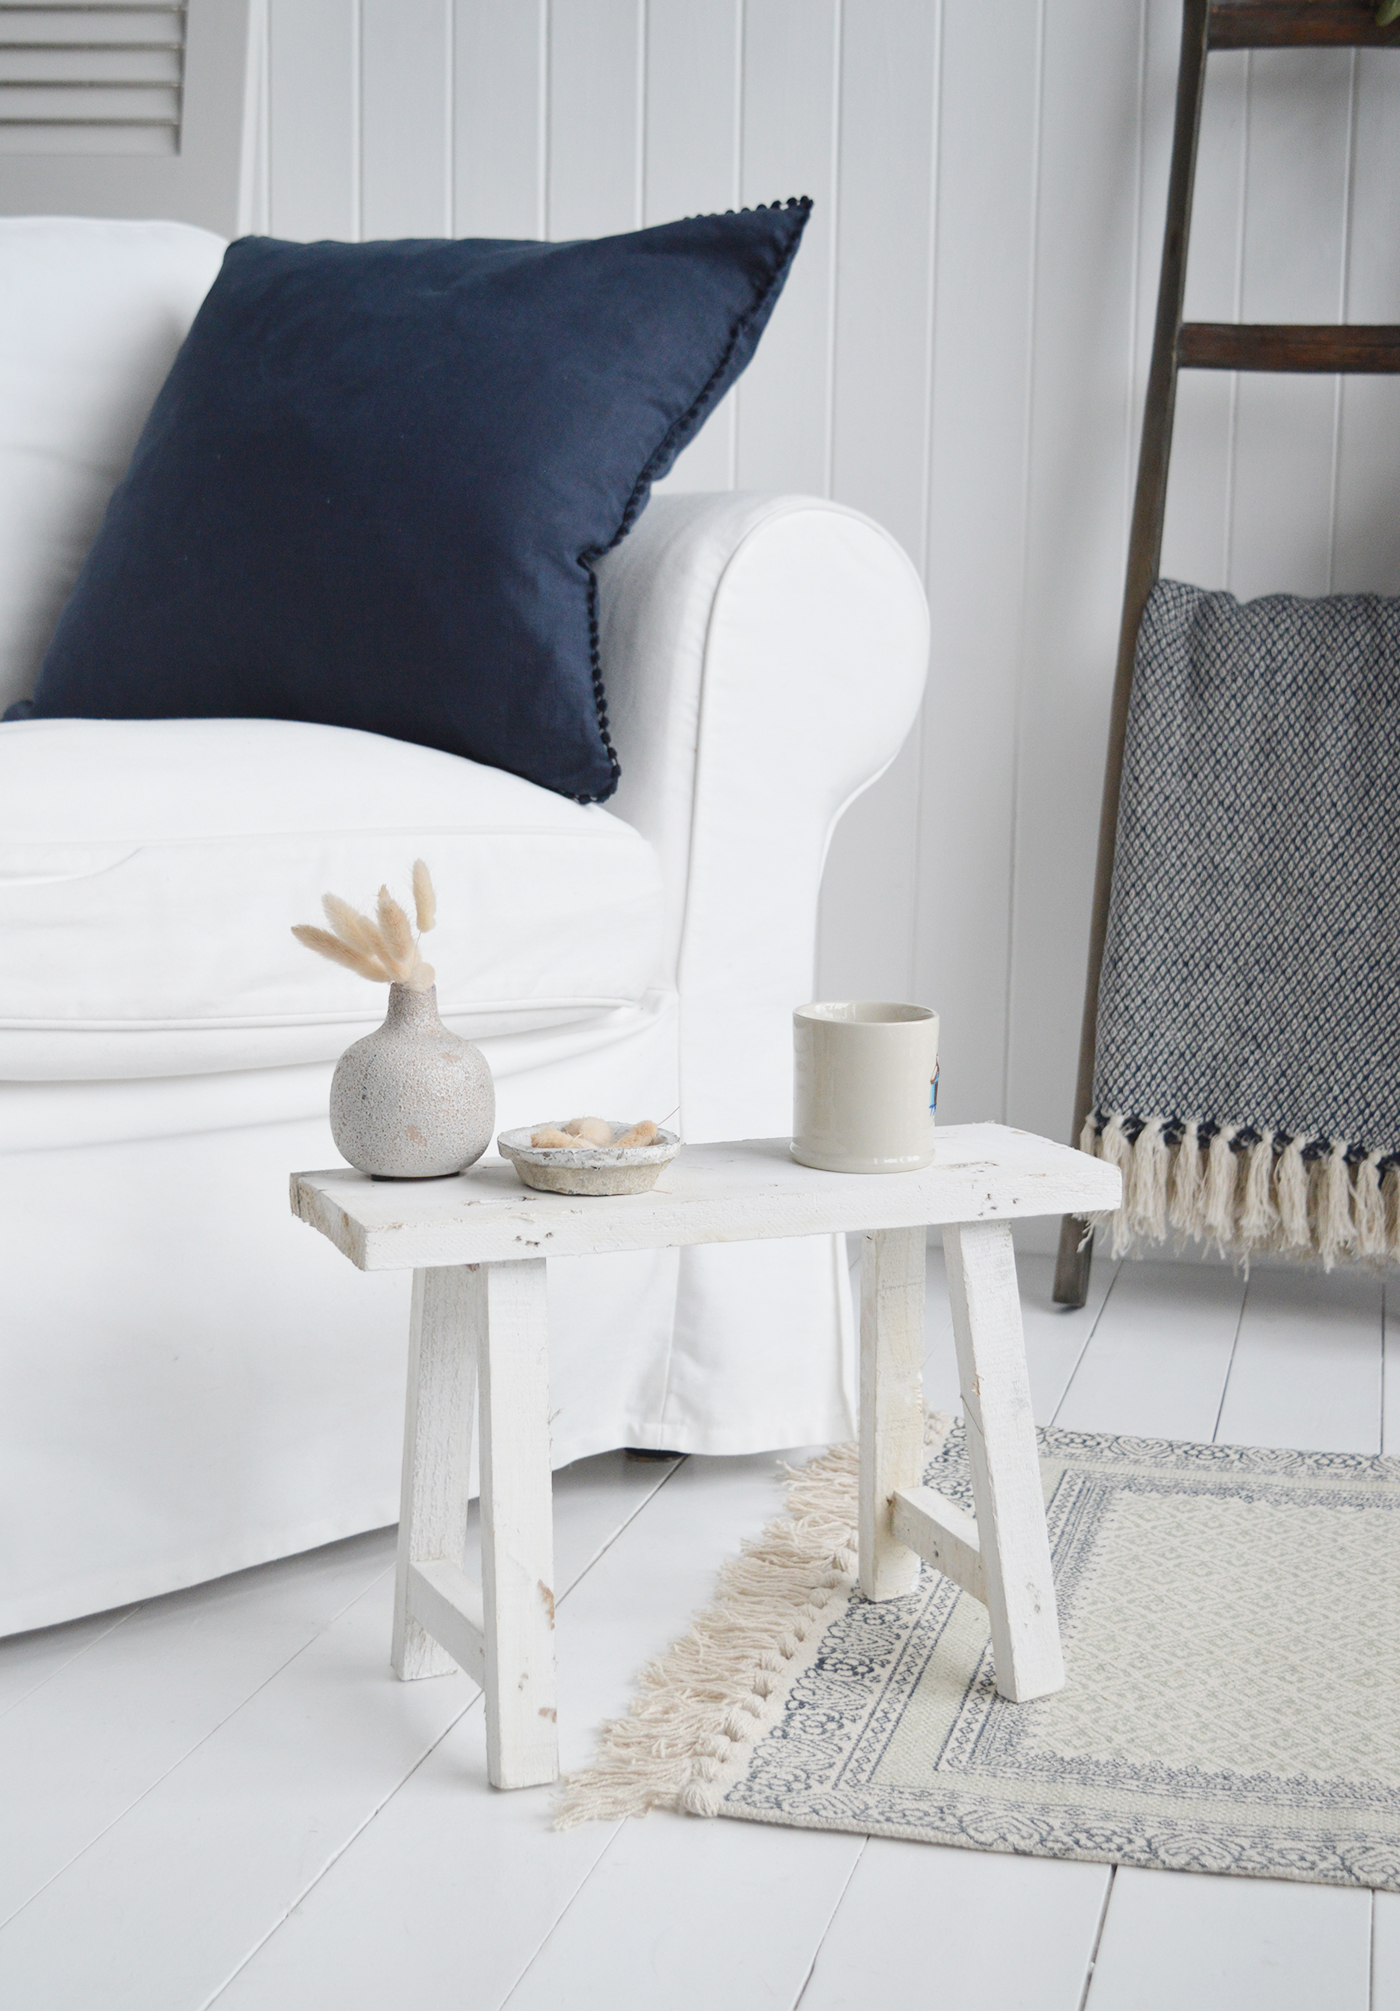 White Decorative rustic woodn stool for Modern Farmhouse, coastal aand country style interiors 